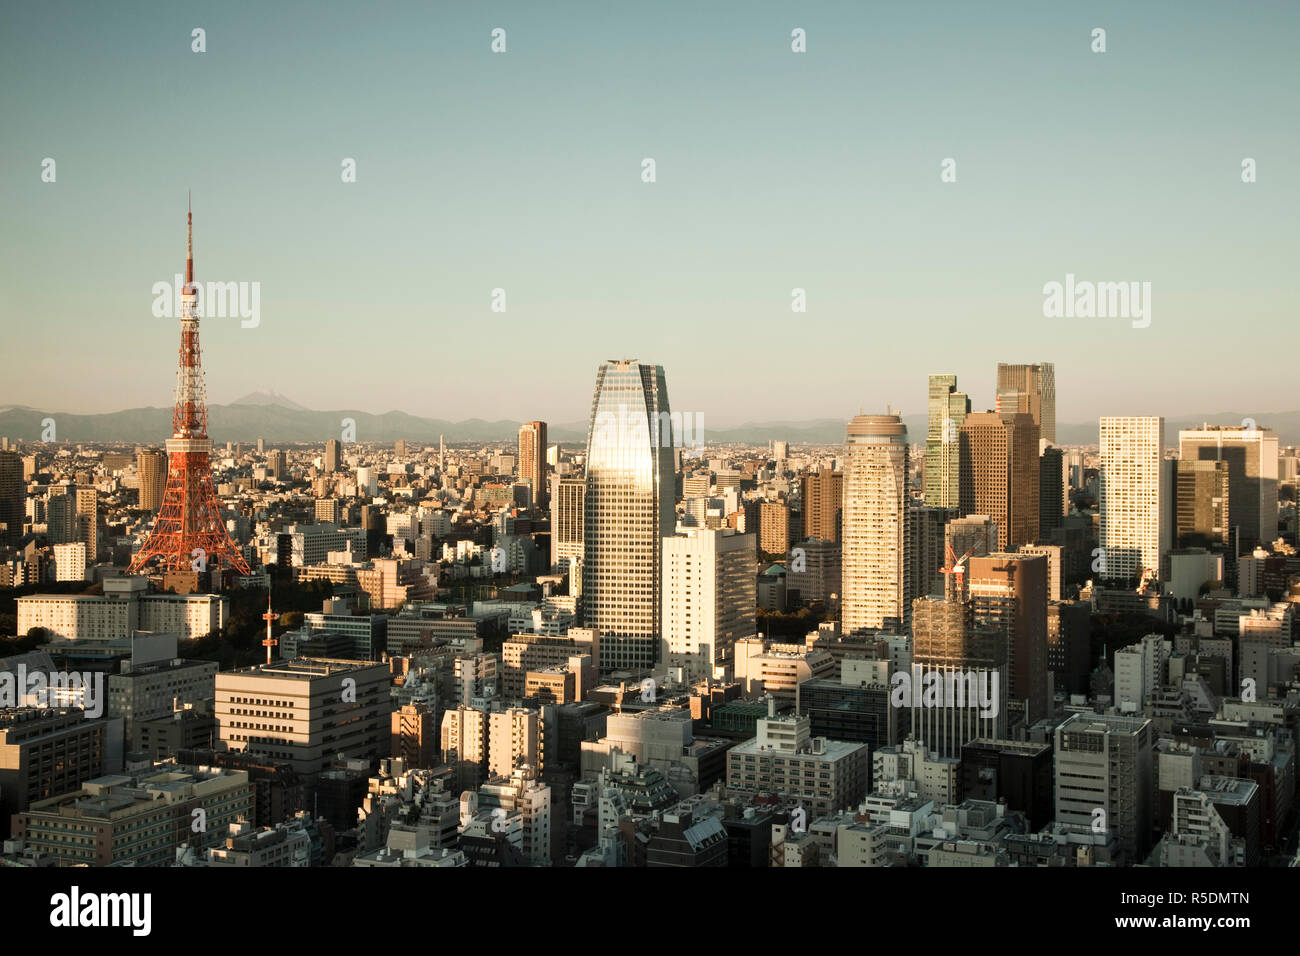 Tokyo Tower and Mt. Fuji from Shiodome, Tokyo, Japan Stock Photo